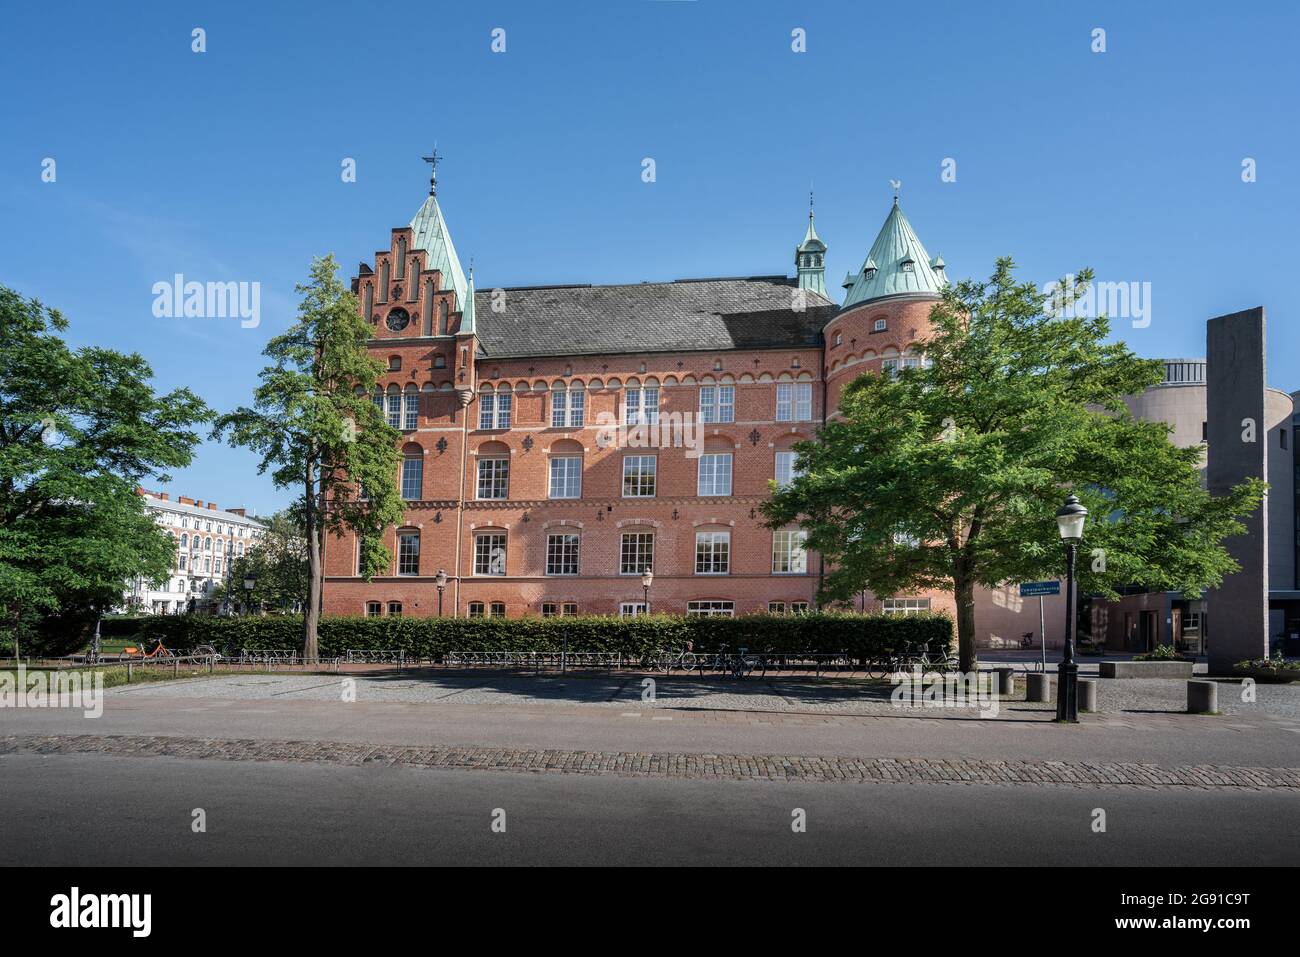 Old Building of Malmo City Library - Malmo, Sweden Stock Photo